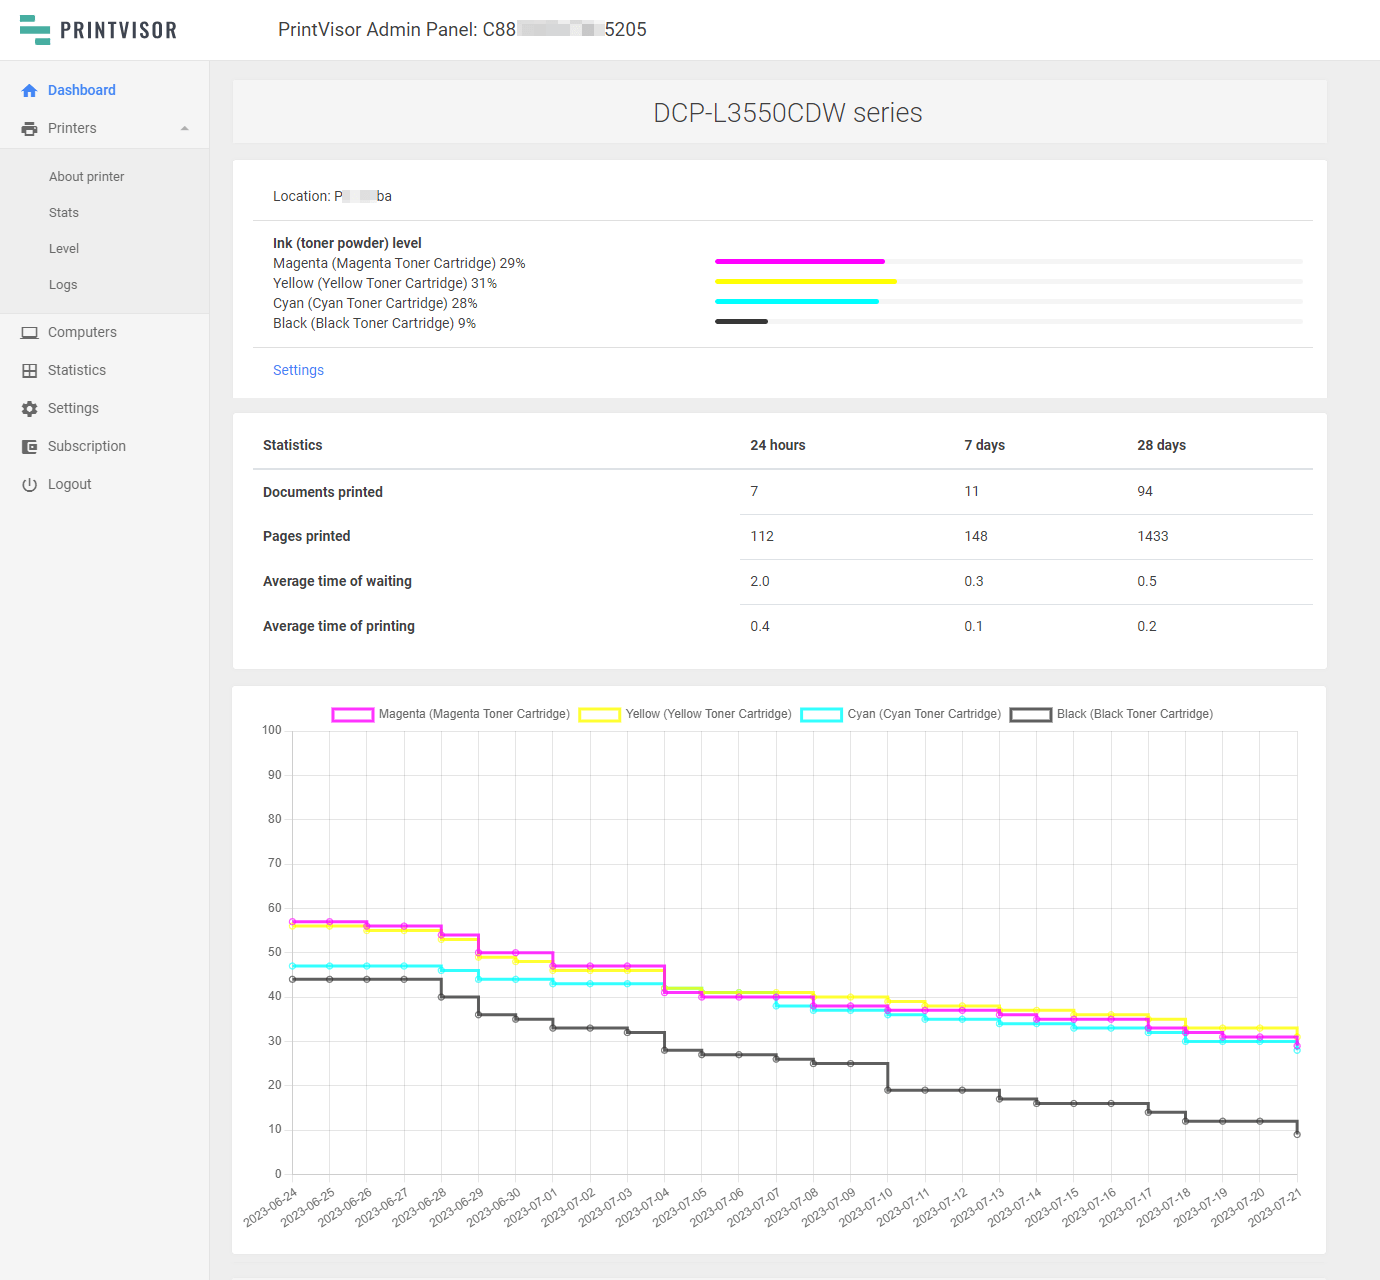 Admin Panel: Overview of Printing Statistics in the Company